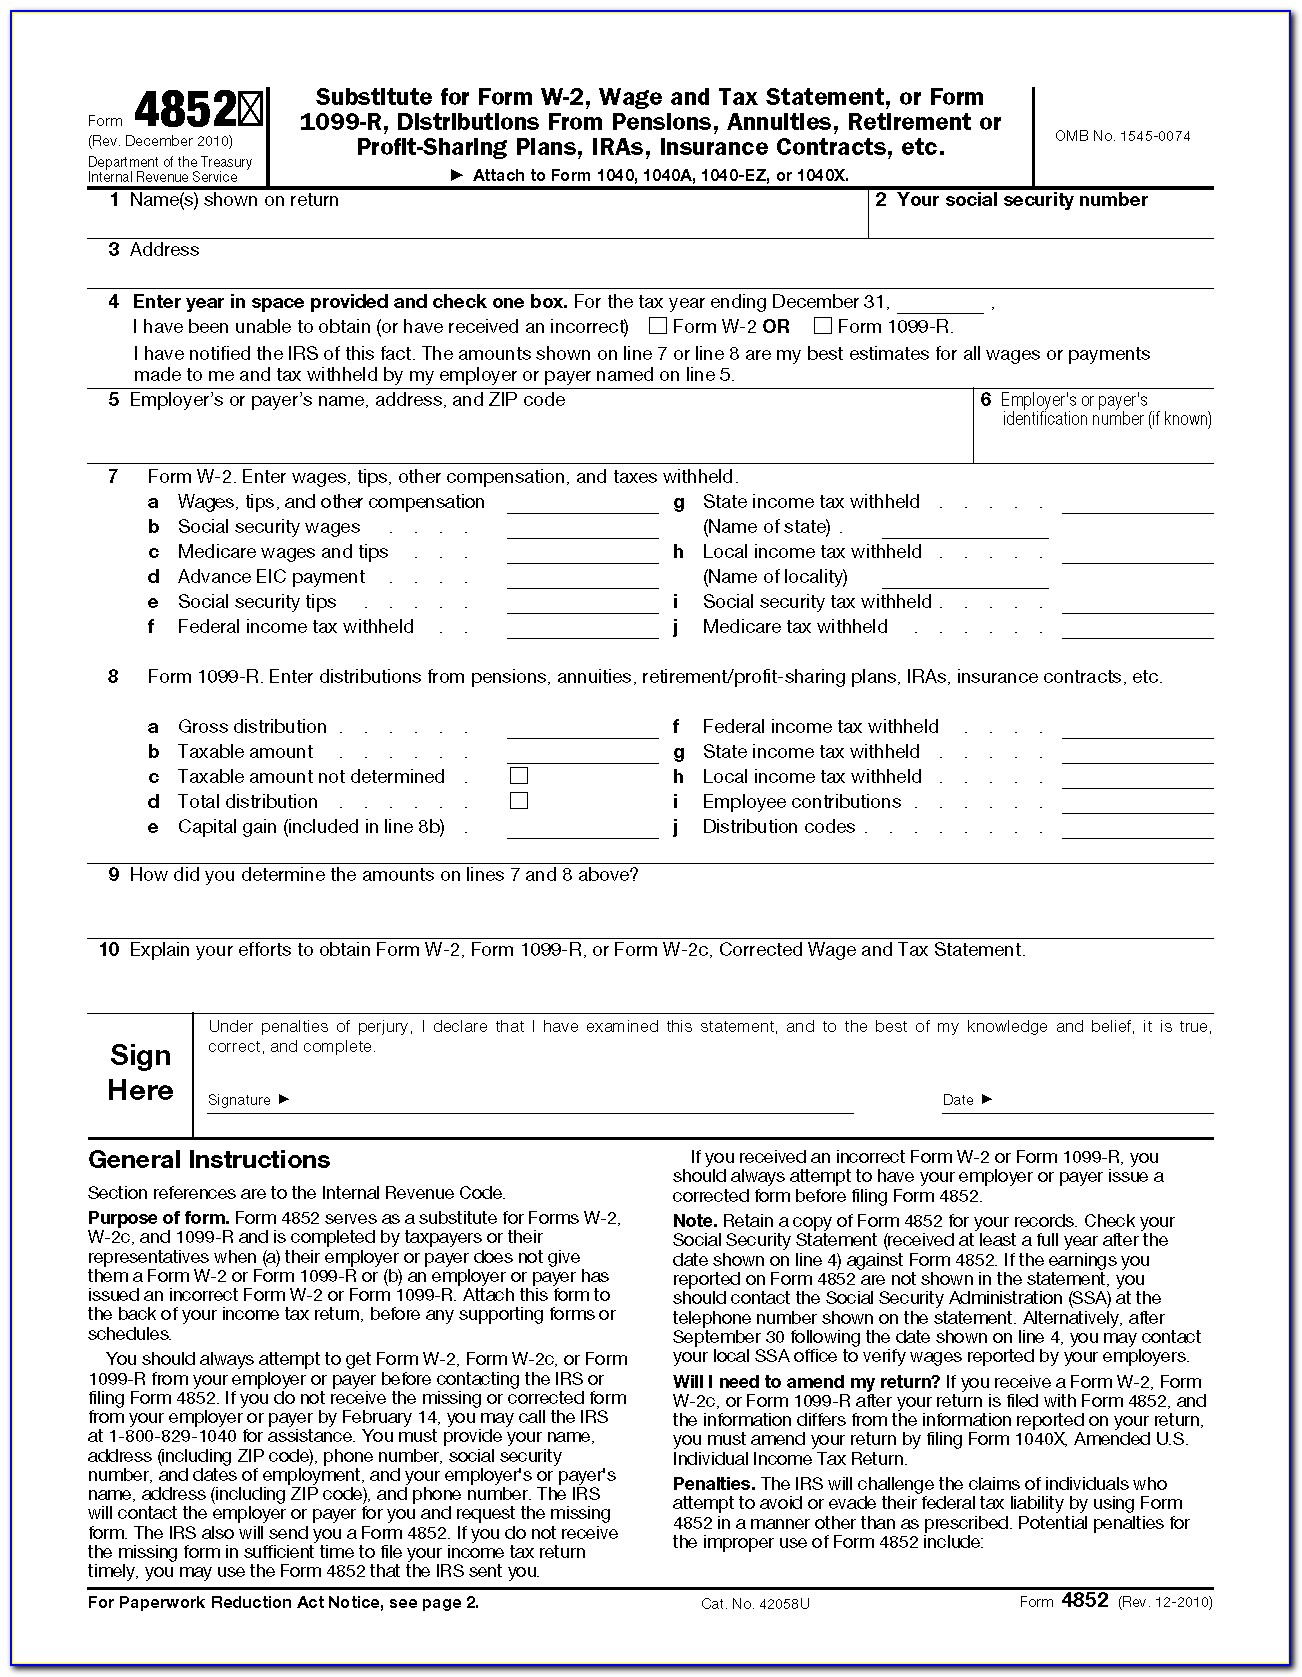 Irs Forms W 2c